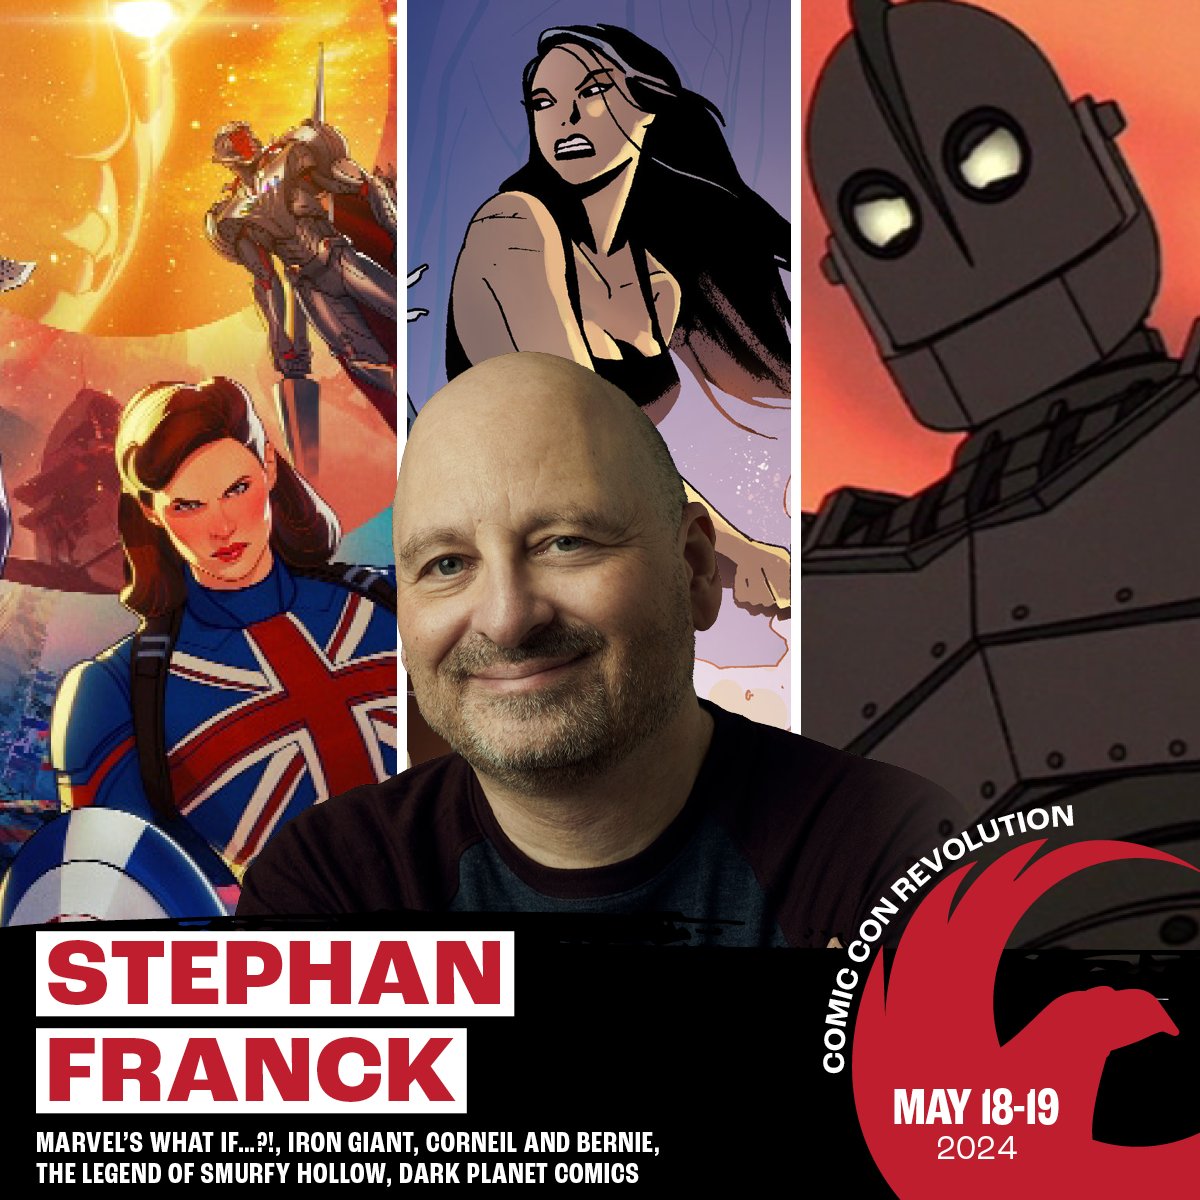 @ComicConRvltn the chillest So Cal show is this WE. Tons of amazing comics + animation guests! I'll be at the @fromdarkplanet and doing an anim panel with @Greg_Weisman @amandadeibert + hanging out w @CharlesStickney @studioskyetiger @jpalmiotti @ericpalicki @HoraToraStudios